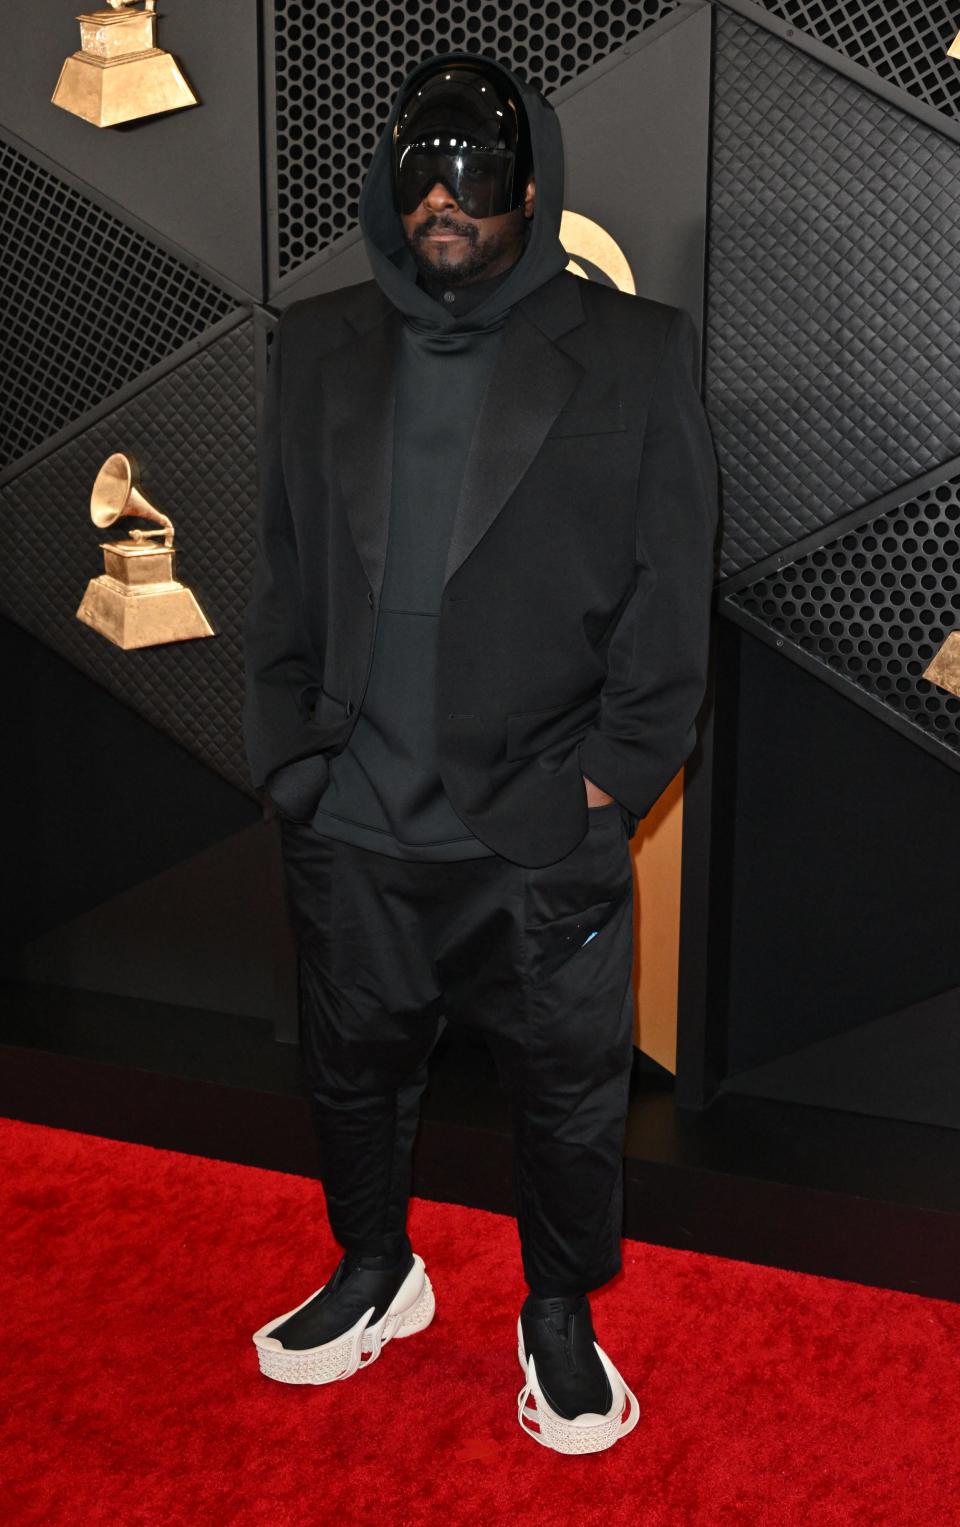 Will.i.am at the 66th Annual Grammy Awards at the Crypto.com Arena in Los Angeles.